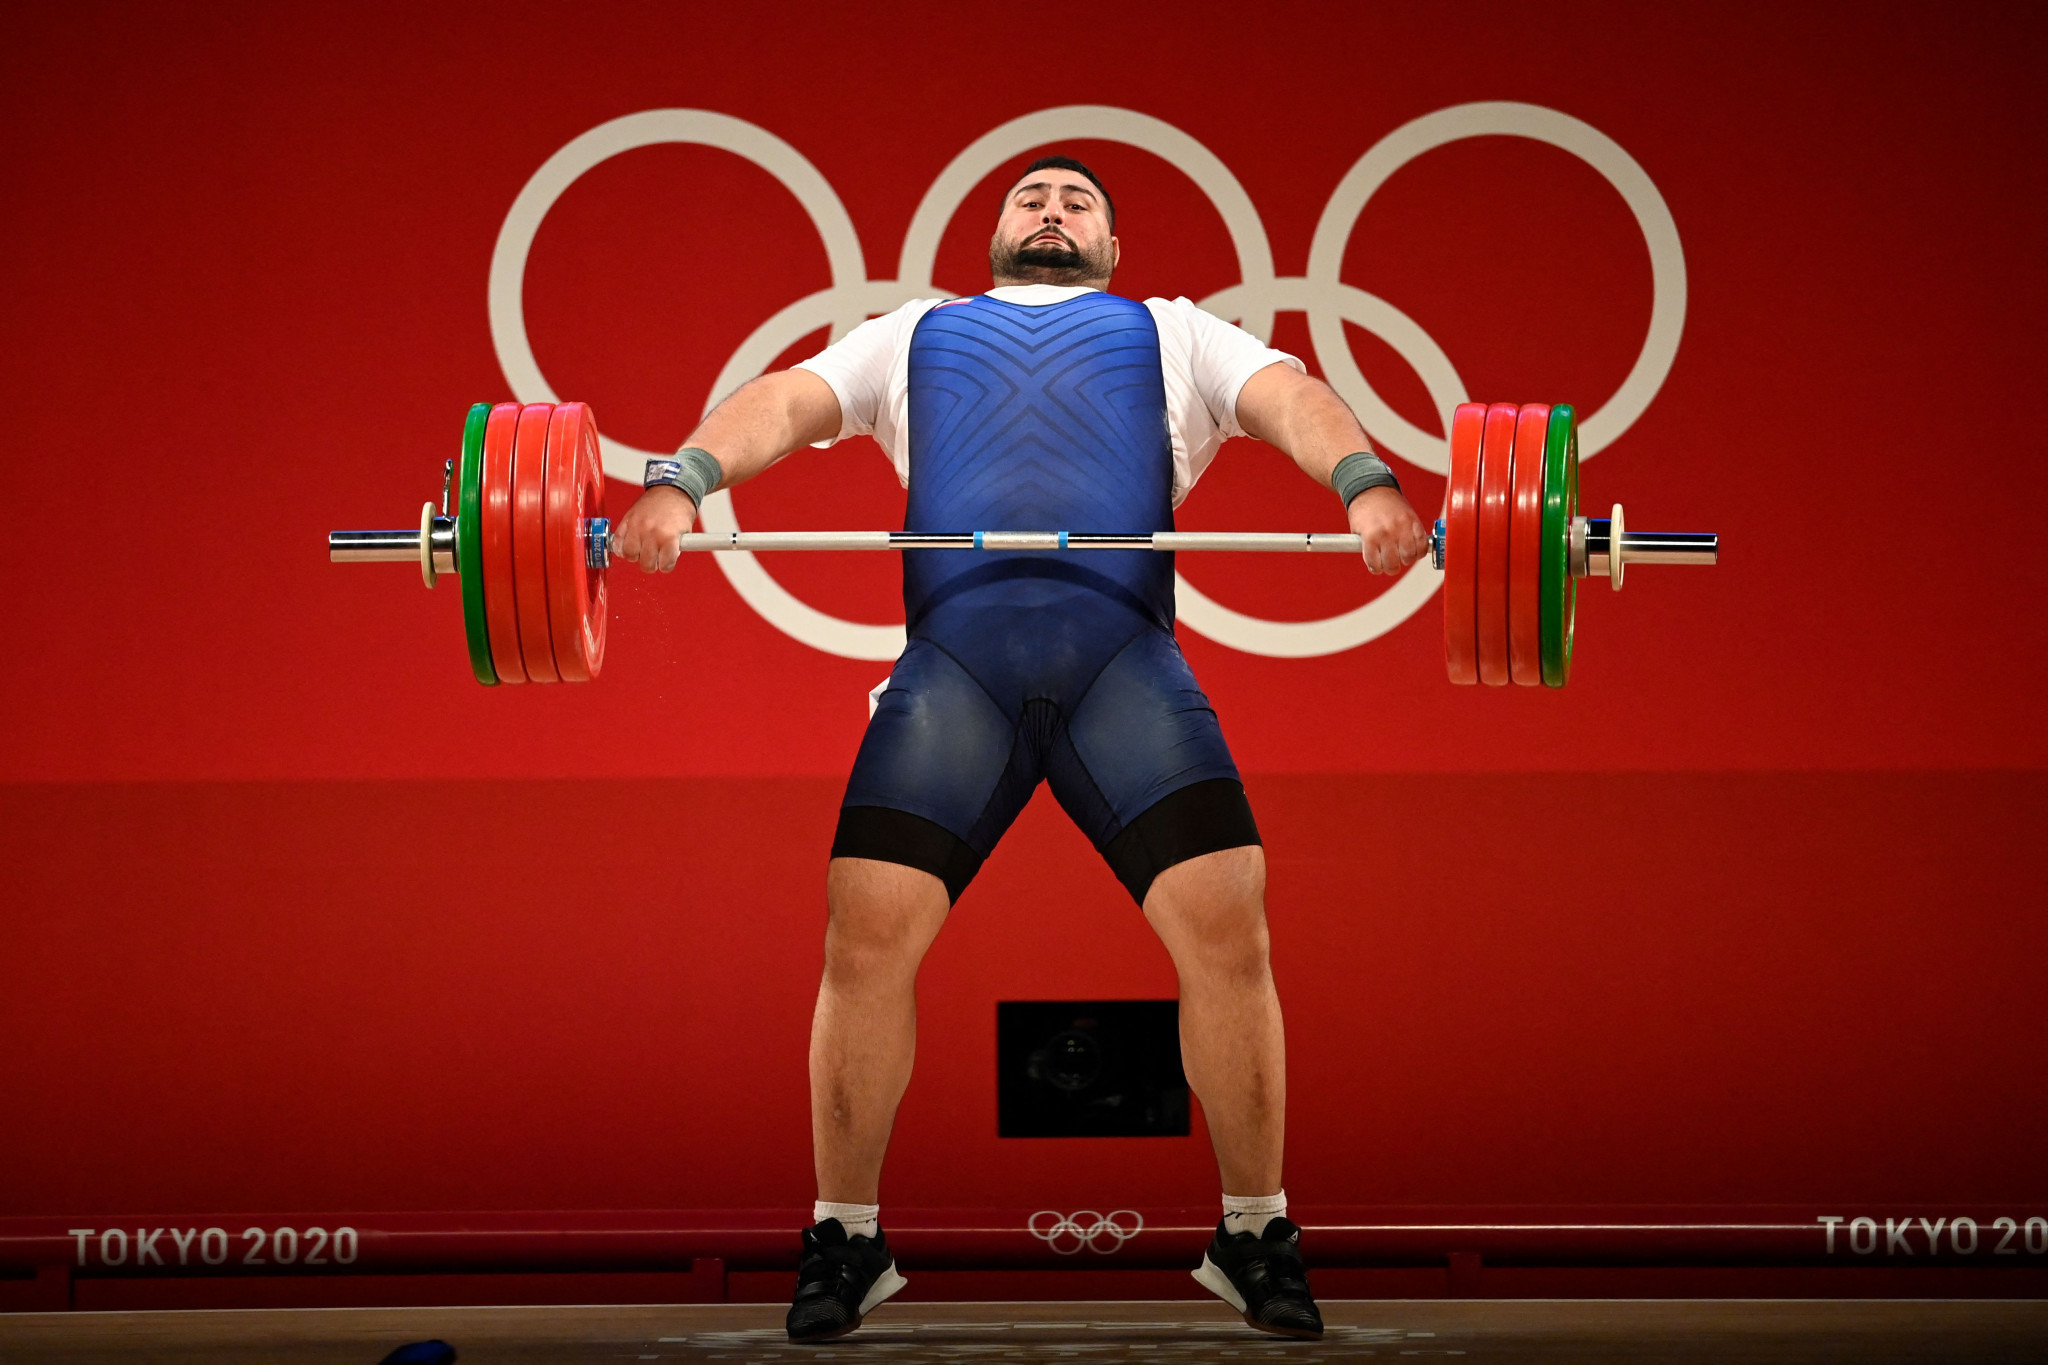 Weightlifting maintained its place at the Olympic Games it has held since Antwerp 1920 for Los Angeles 2028 ©Getty Images